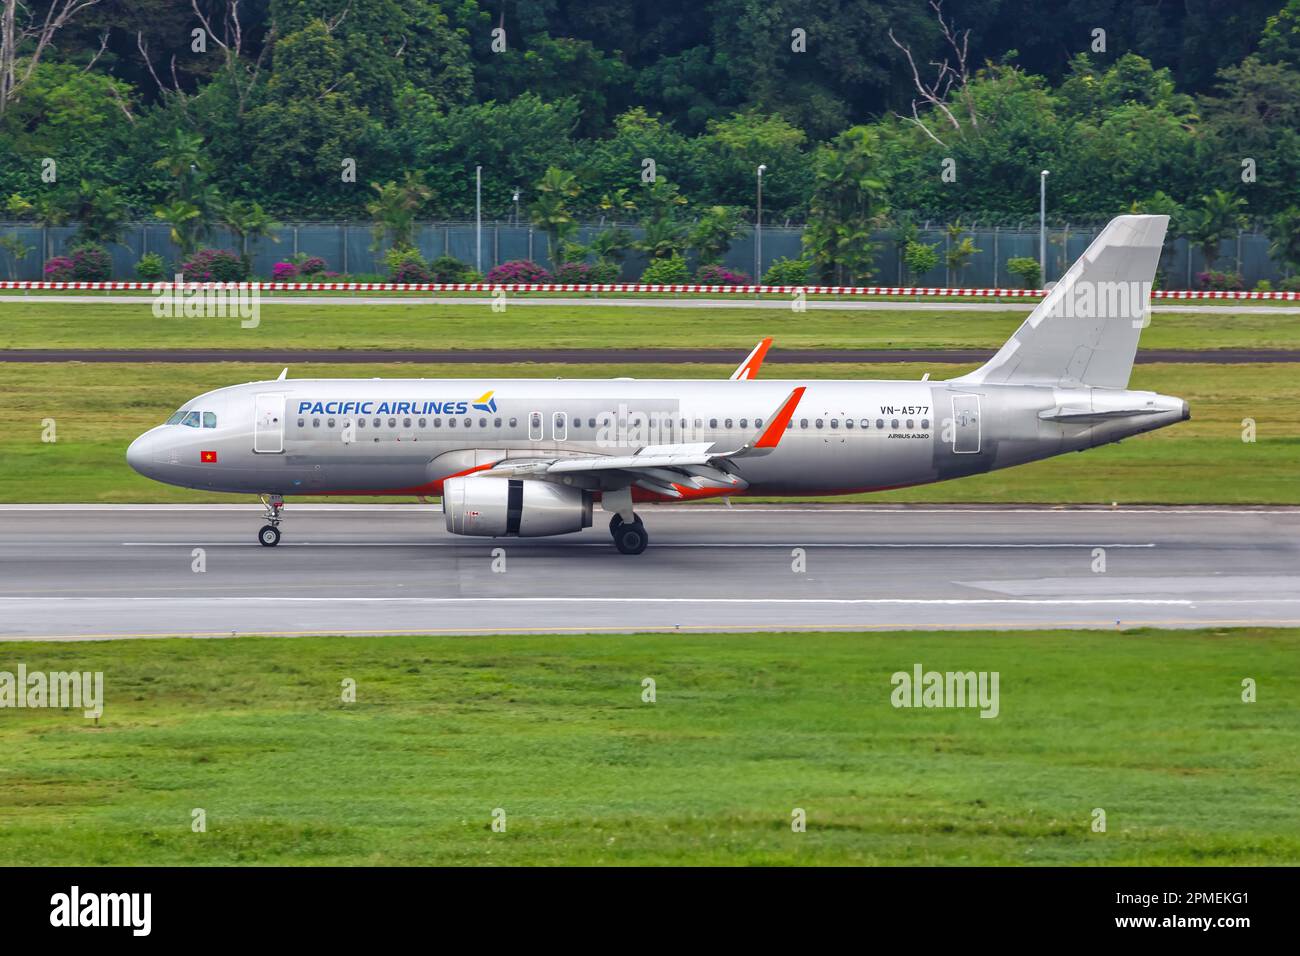 Changi, Singapore - February 3, 2023: Pacific Airlines Airbus A320 airplane at Changi Airport (SIN) in Singapore. Stock Photo